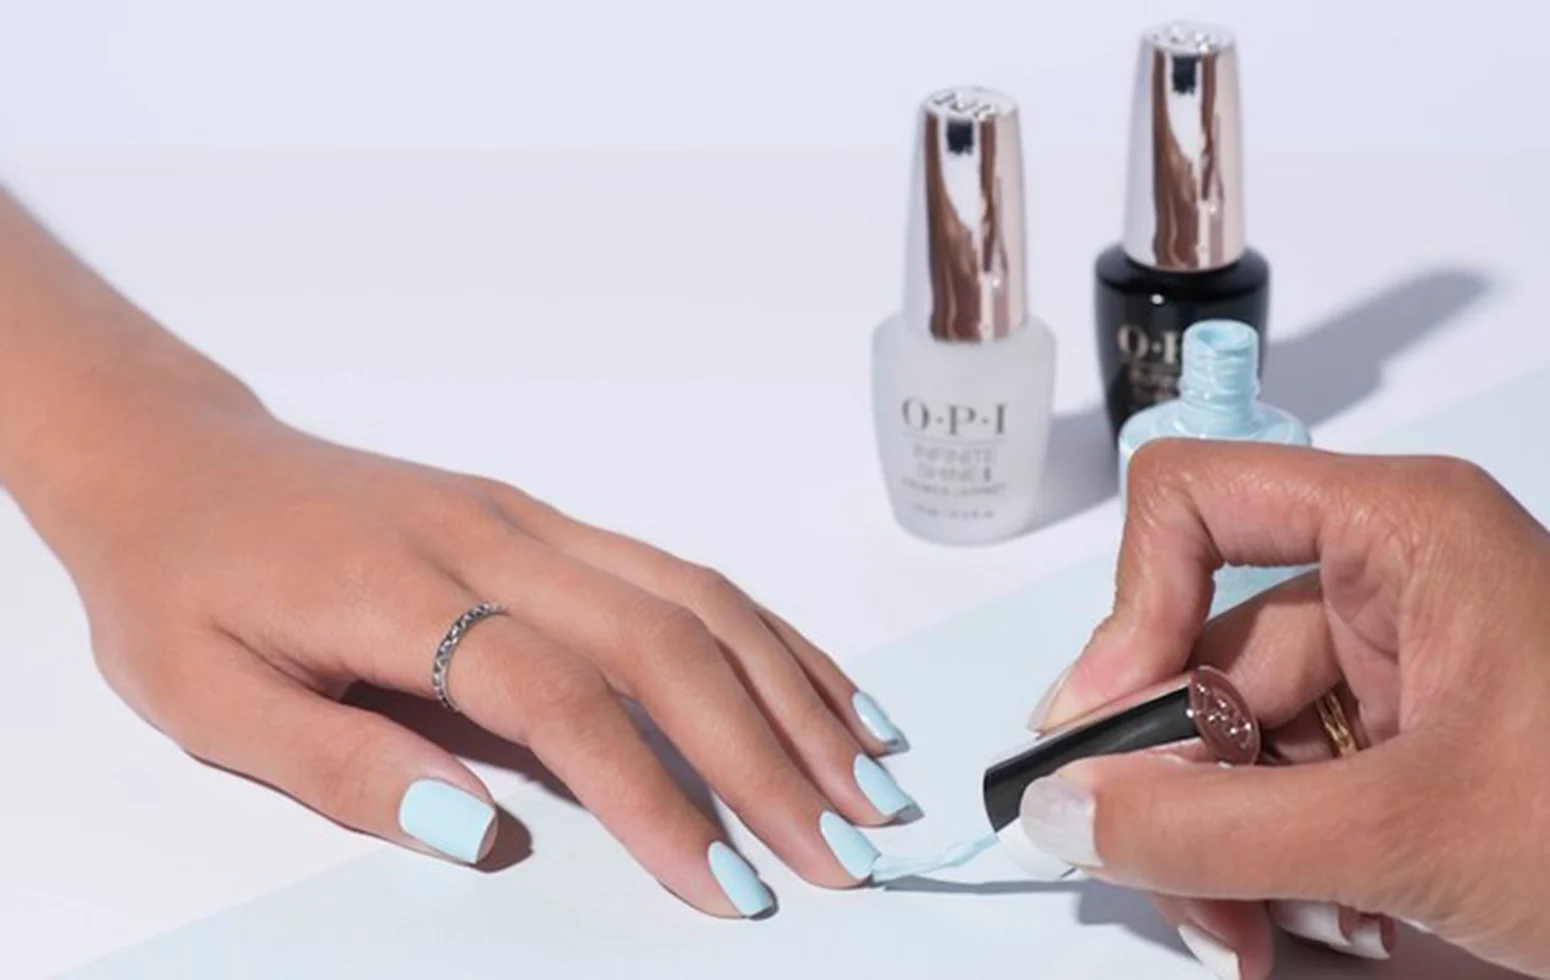 7 Fun Facts About OPI's Infinite Shine 3-Step System